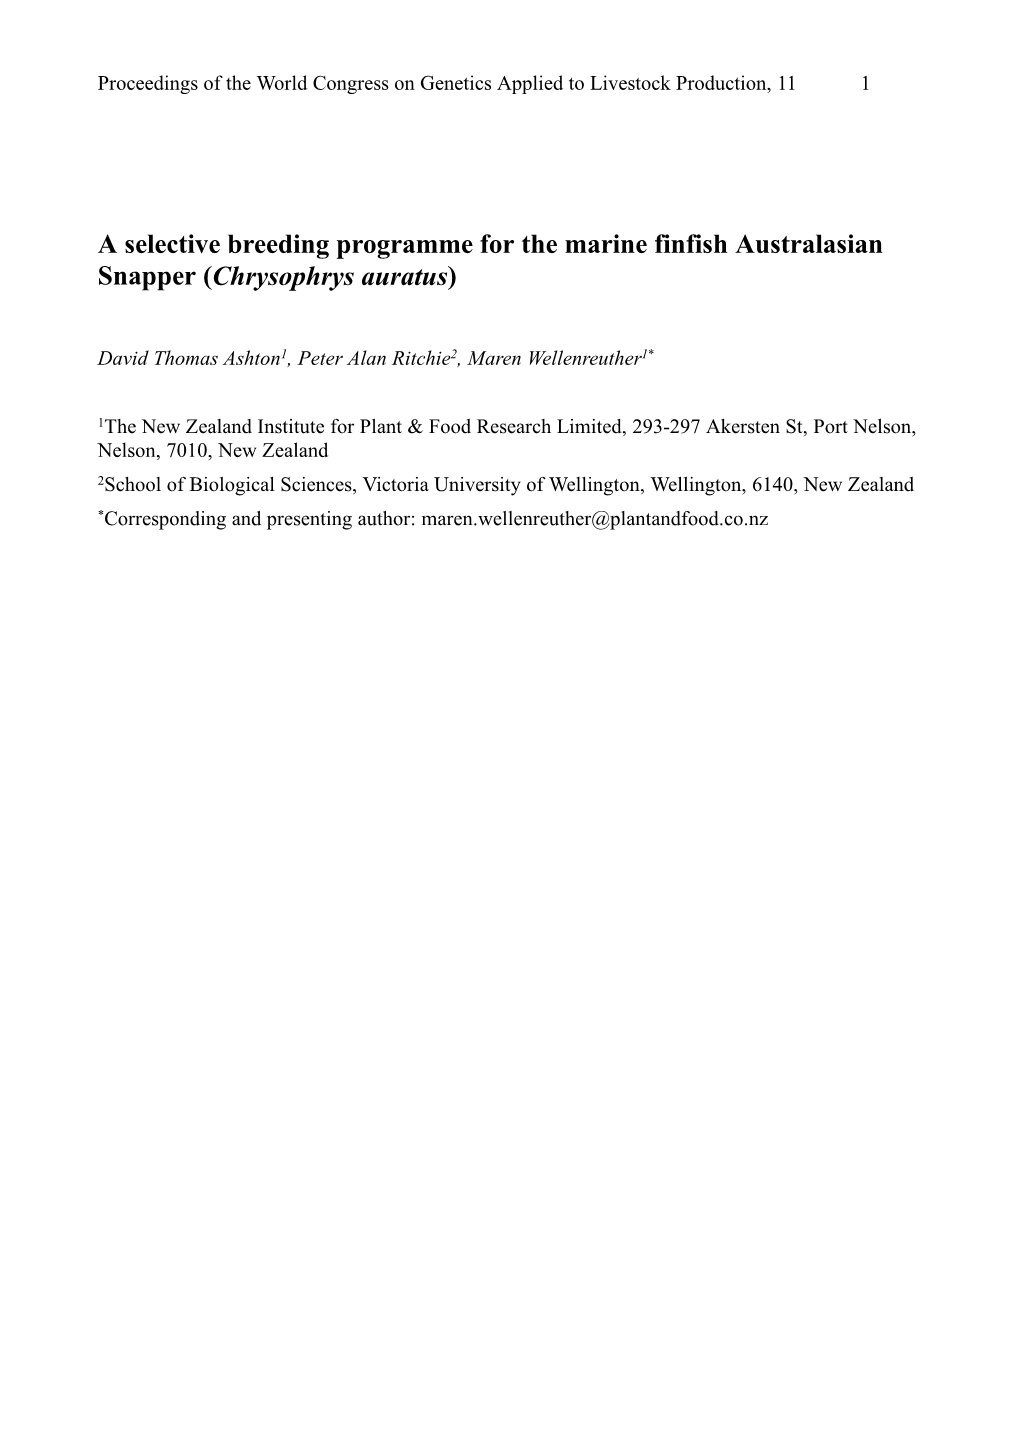 A Selective Breeding Programme for the Marine Finfish Australasian Snapper (Chrysophrys Auratus)